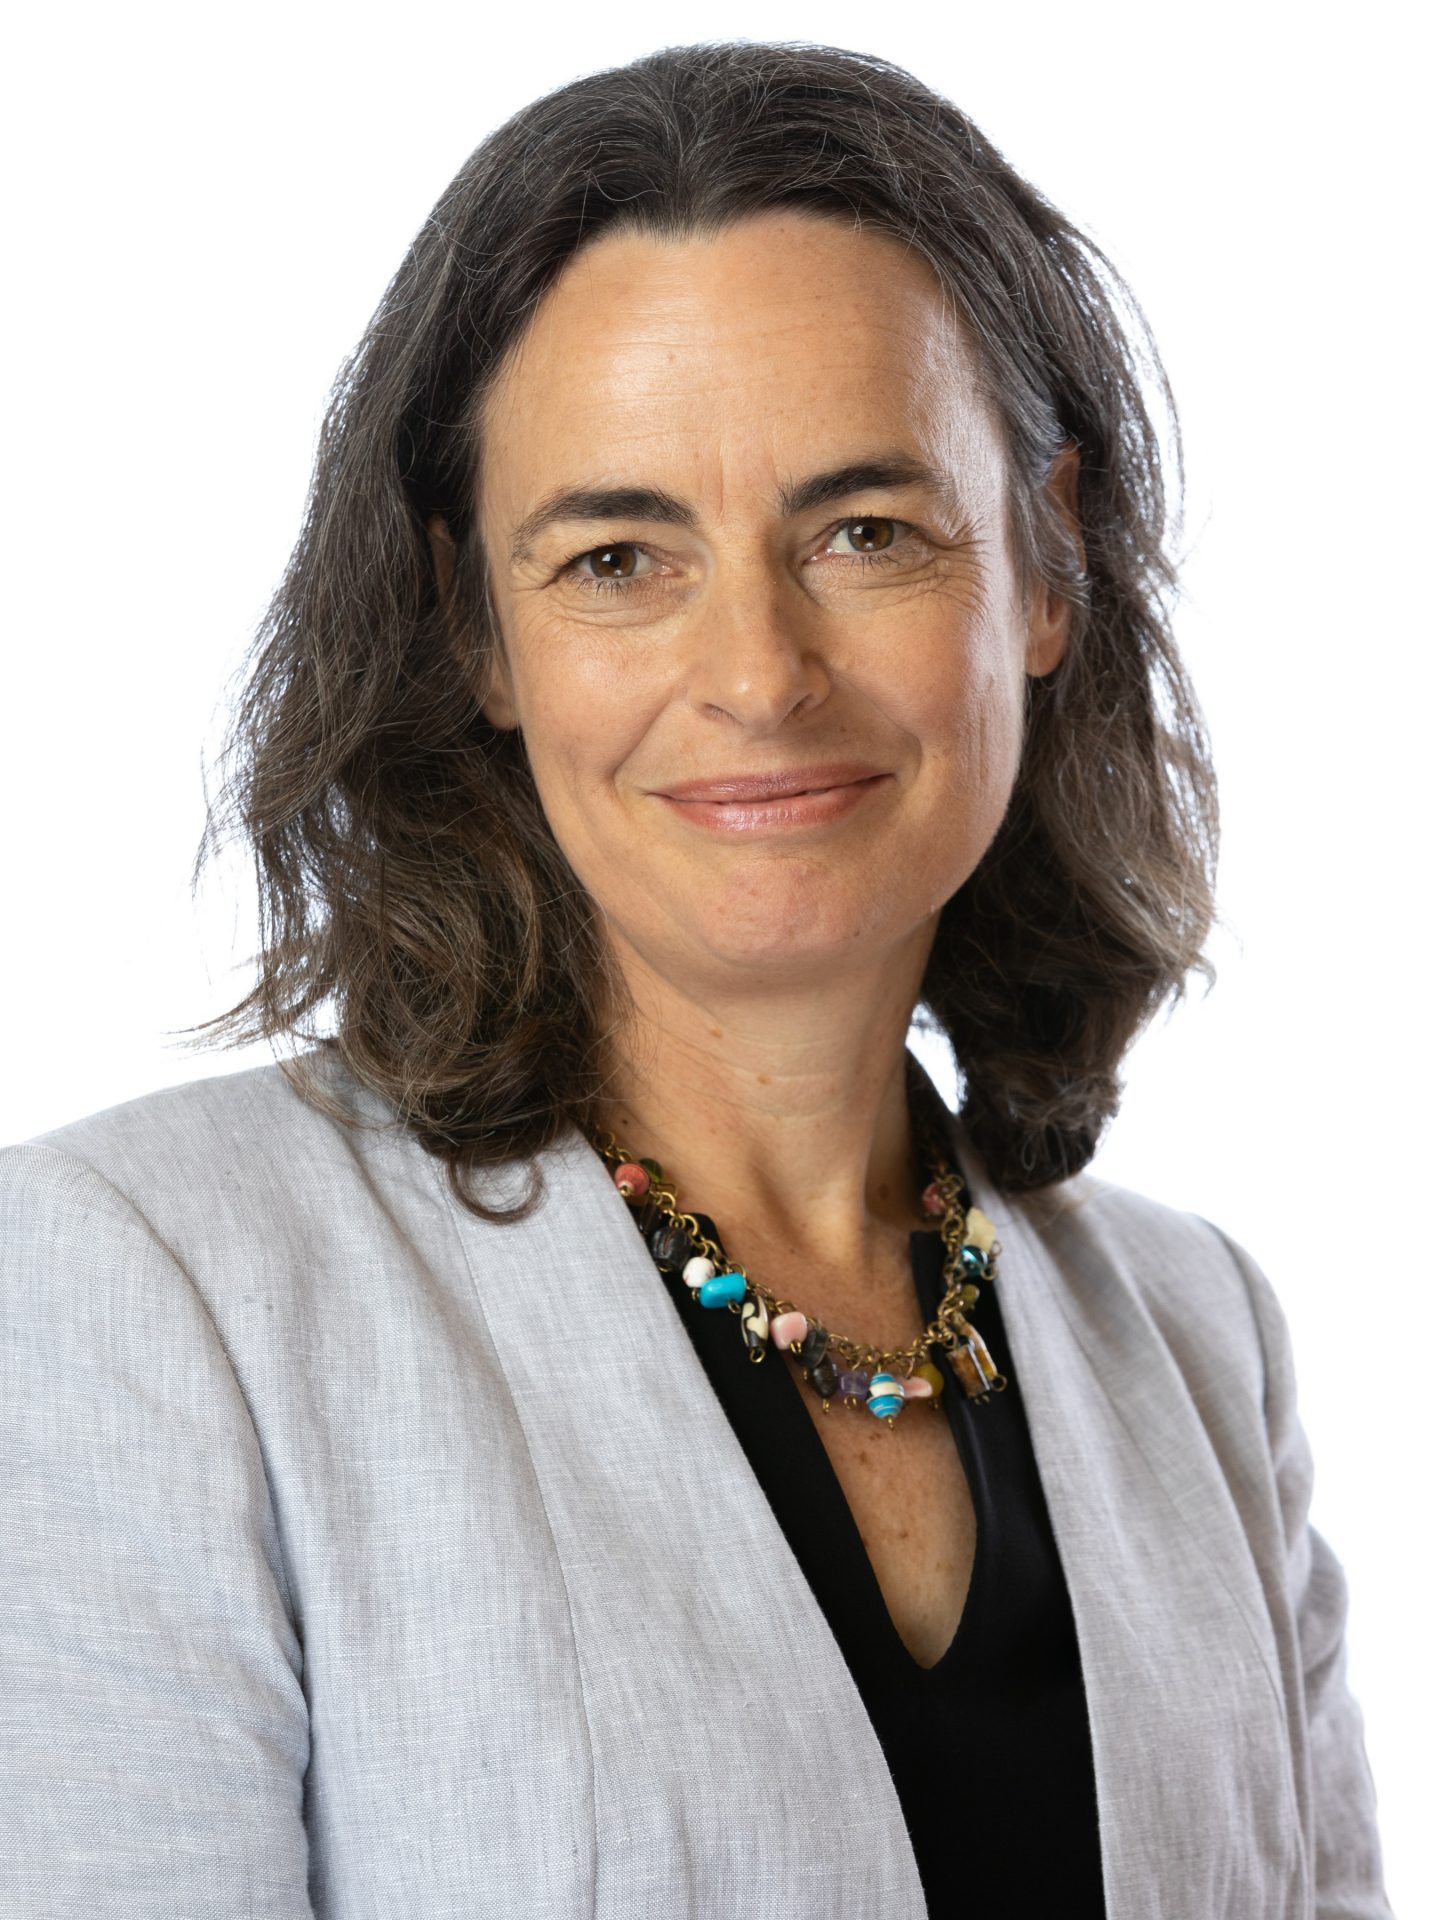  /></noscript></p>
<p>Life Unlimited Charitable Trust, which nationally provides health and disability information, advice and equipment, supports a major review of the health and disability system but not at the expense of the learning achieved under Enabling Good Lives (EGL) and system transformation.</p>
<p>Life Unlimited chief executive Megan Thomas says EGL and system transformation is working towards embedded disability supports in New Zealand communities and will allow disabled people and their whānau greater choice and control over their own disability supports.</p>
<p>“We see people whose lives have changed for the better as a result of what’s happening in the sector and the last thing we need is for that impetus to stop because of the review,” she said.</p>
<p>“Disability supports must be embedded in communities to effectively offer choice and connection within an individual’s community.”</p>
<p>Services and resourcing for disability support services must be ring-fenced to ensure equitable outcomes, said Ms Thomas.</p>
<p>“We need to focus on wellbeing and let disability have a voice.</p>
<p>“Life Unlimited is a community organisation specifically focussed on enabling independence and good lives for people with disabilities; we will advocate strongly on behalf of the disabled who have been poorly served by the existing health and disability system,” said Ms Thomas.</p>
<h3>Key Messages</h3>
<ul>
<li>Life Unlimited’s strength for more than 40 years is in offering health and disability information, advice and equipment to enable people to live the life they choose.</li>
<li>We work both nationally and regionally.</li>
<li>We support a major review of the health & disability system.</li>
<li>Changing the focus to wellbeing of consumers, whānau and communities is a positive move.</li>
<li>Disability supports must be embedded in communities to effectively offer choice and connection within an individual’s community.</li>
<li>It is important this review does not slow down the changes already underway in the disability system.</li>
<li>We should put improvements in place now based on what has been learnt from systems transformation, these can then be lifted and placed into tier 1 later.</li>
<li>Tier 1 services and resourcing must be ring-fenced to ensure the right focus is placed at a community level.</li>
<li>Effective and responsive disability information and connection is essential. There is a requirement for universal quality information that is consistent across the country, along with personalised tailored information that is unique to the local community and individual needs.</li>
<li>We support needs assessment processes to be responsive and fair. Our experience tells us we can make this happen within the current system.</li>
<li>Not all commissioning will be successful at a regional level as the system requires some nationally consistent, quality information that is best sourced nationally.</li>
<li>Disabled and autistic people need to be involved throughout the system.</li>
</ul>
</div>
</div>
<div class=